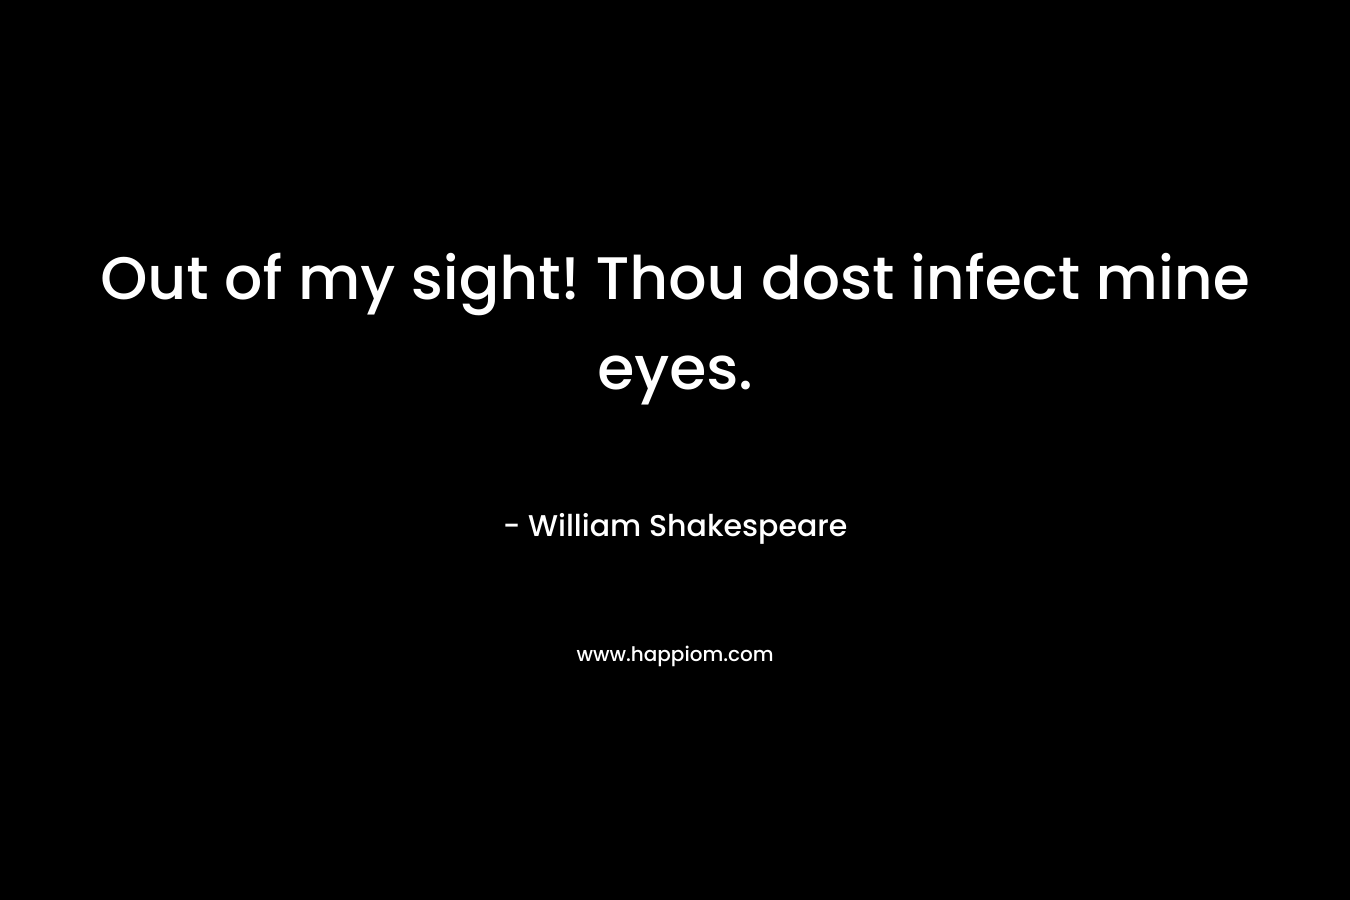 Out of my sight! Thou dost infect mine eyes.